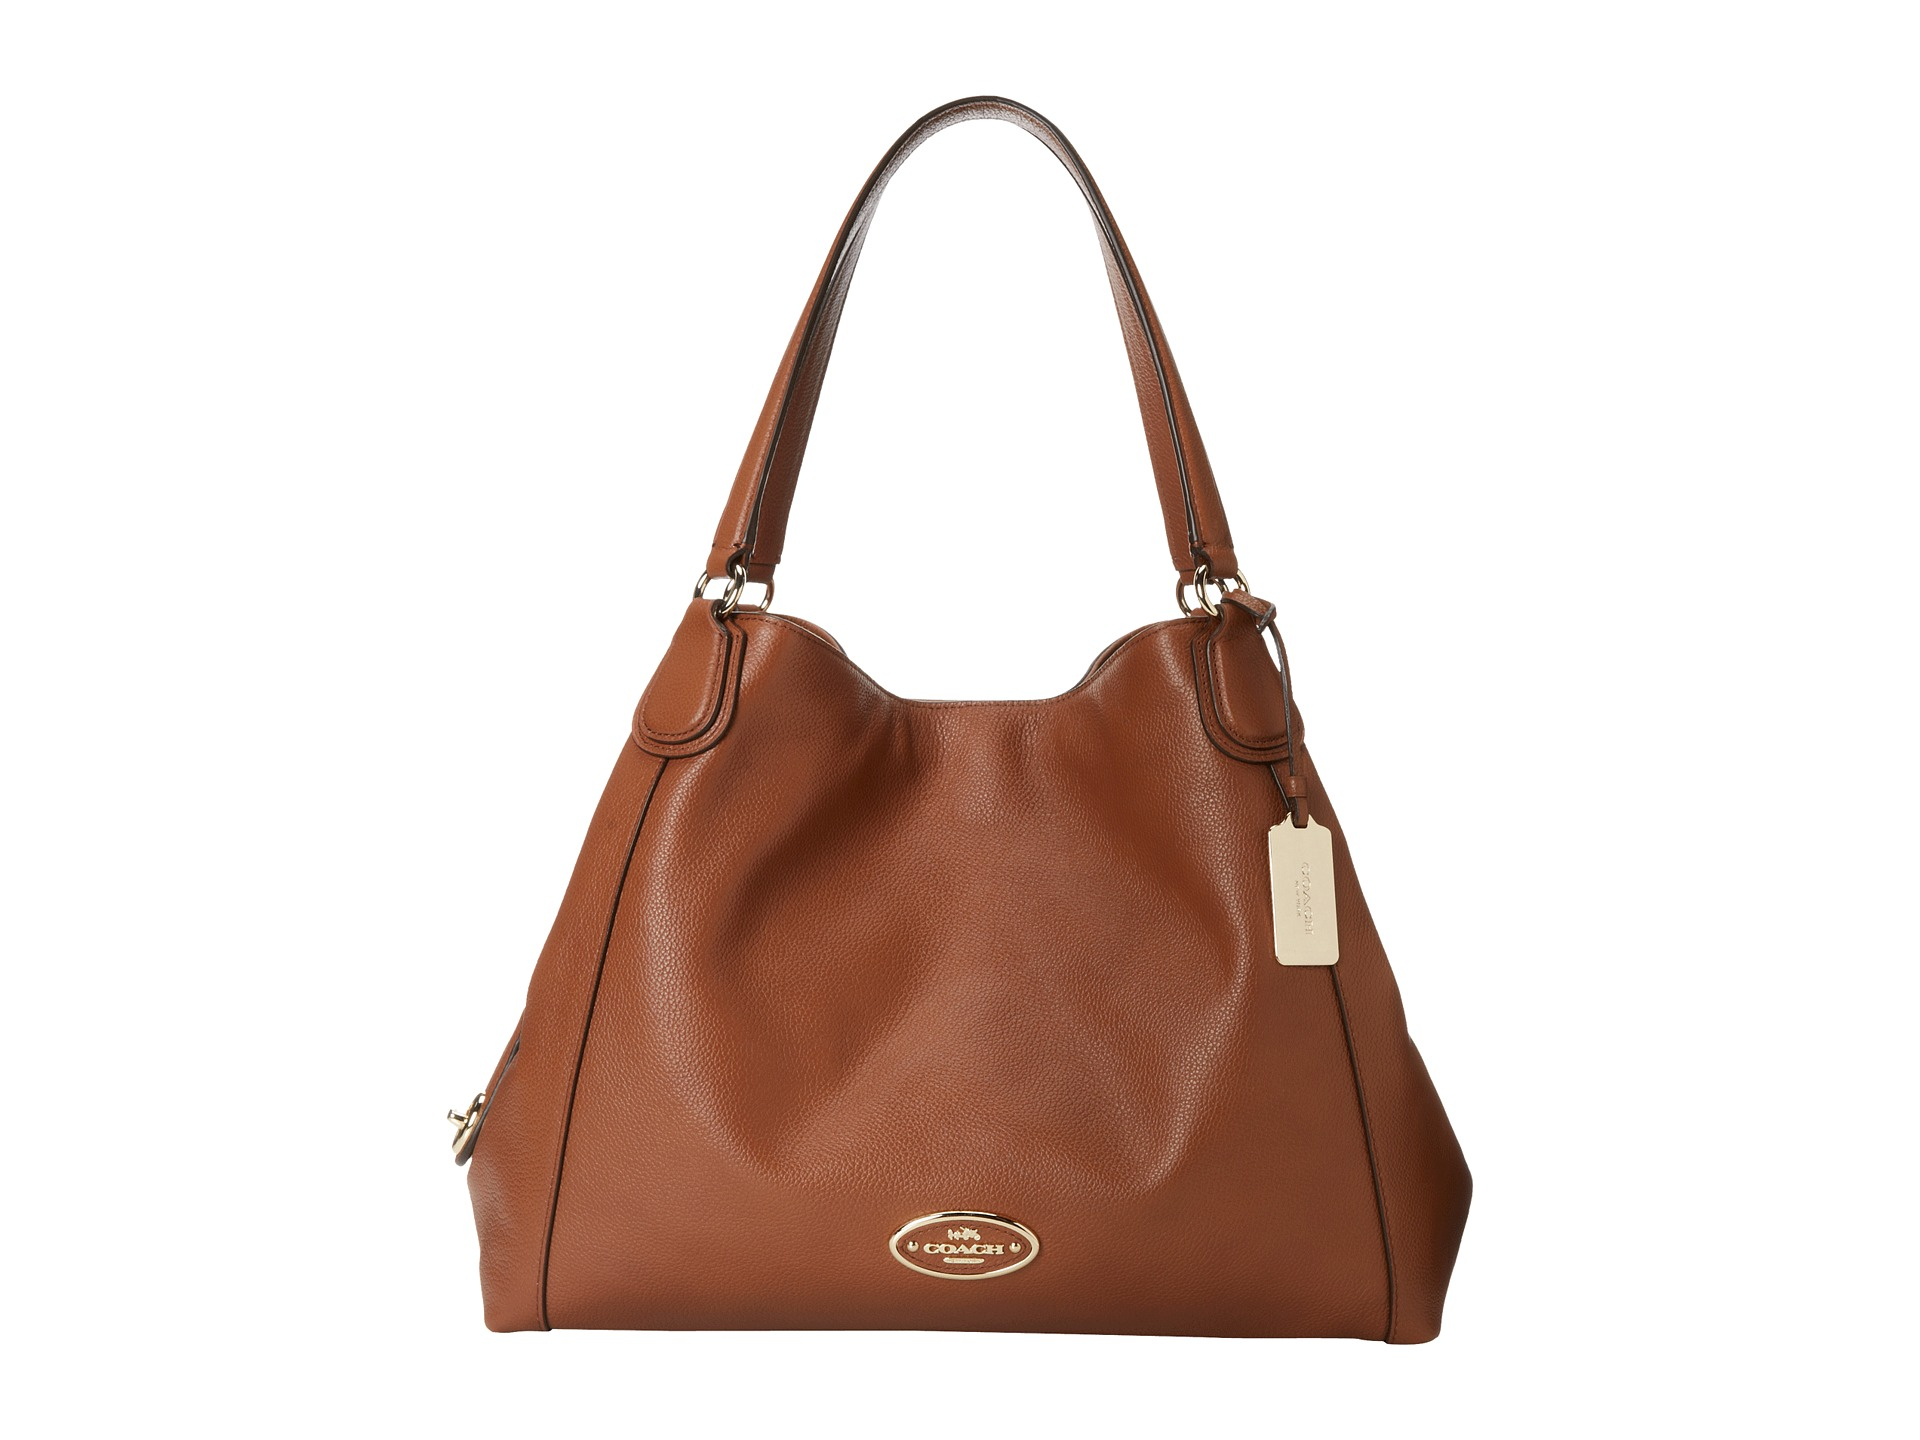 Lyst - Coach Refined Pebbled Leather Edie Shoulder Bag in Brown